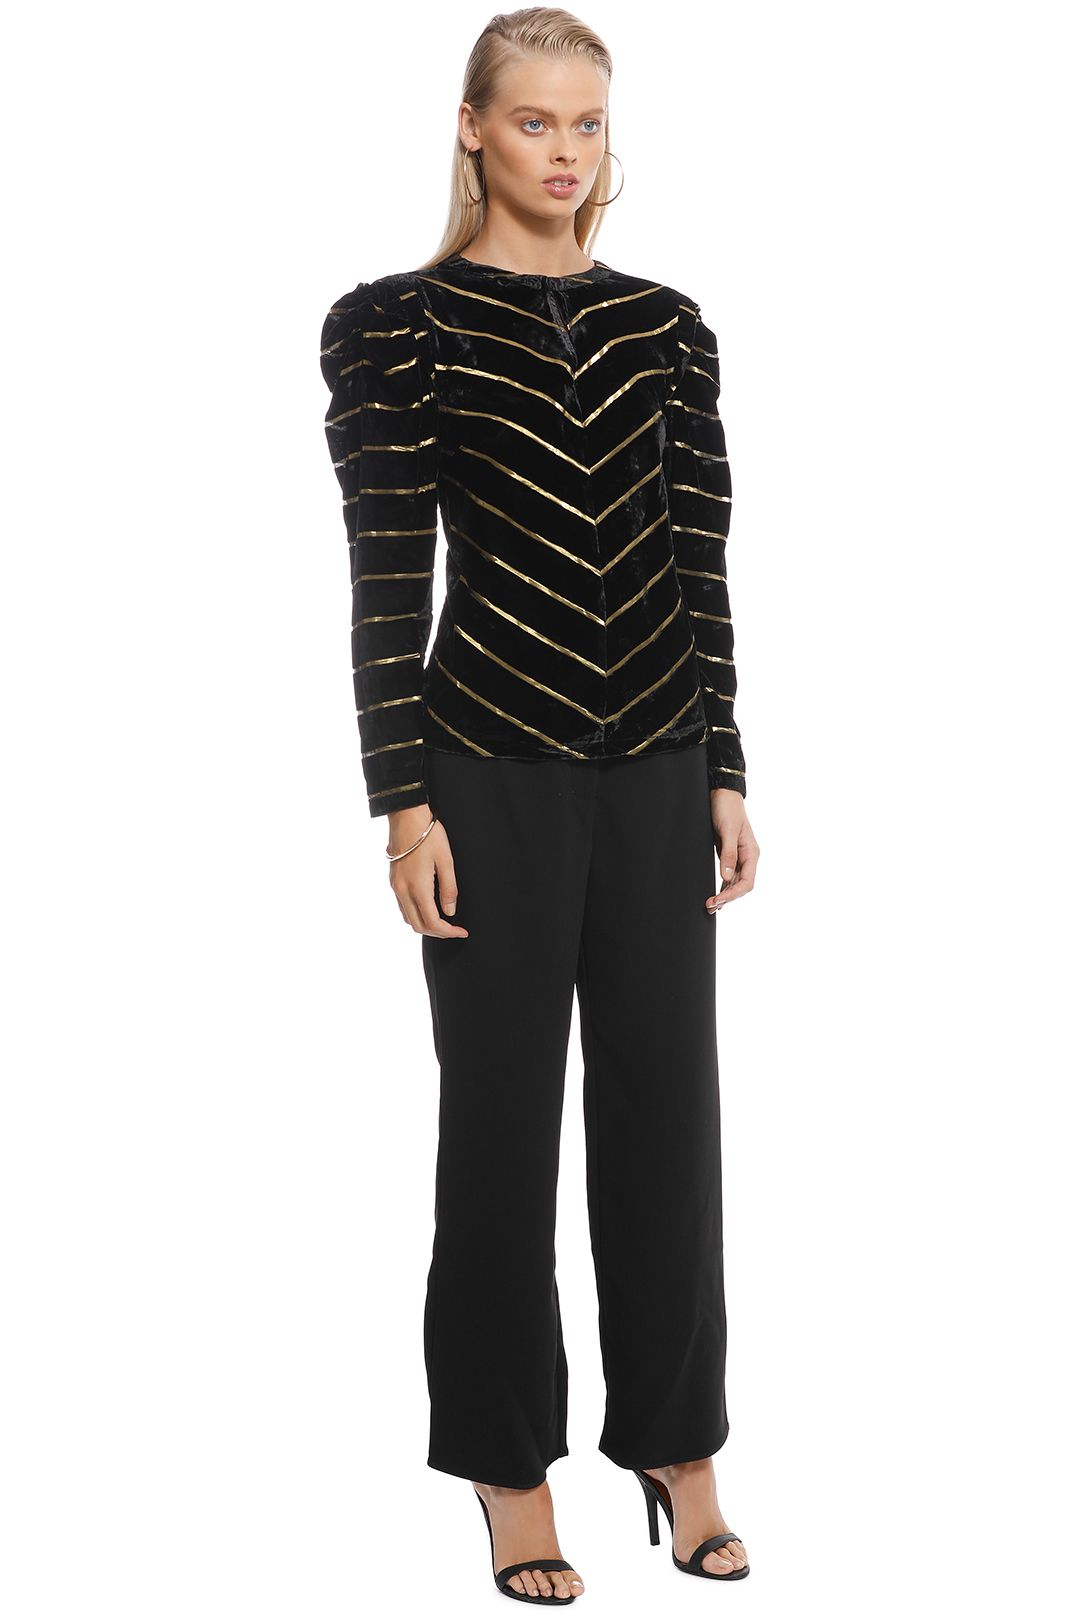 Ministry of Style - Twilight Stripe Top - Black Gold - Side